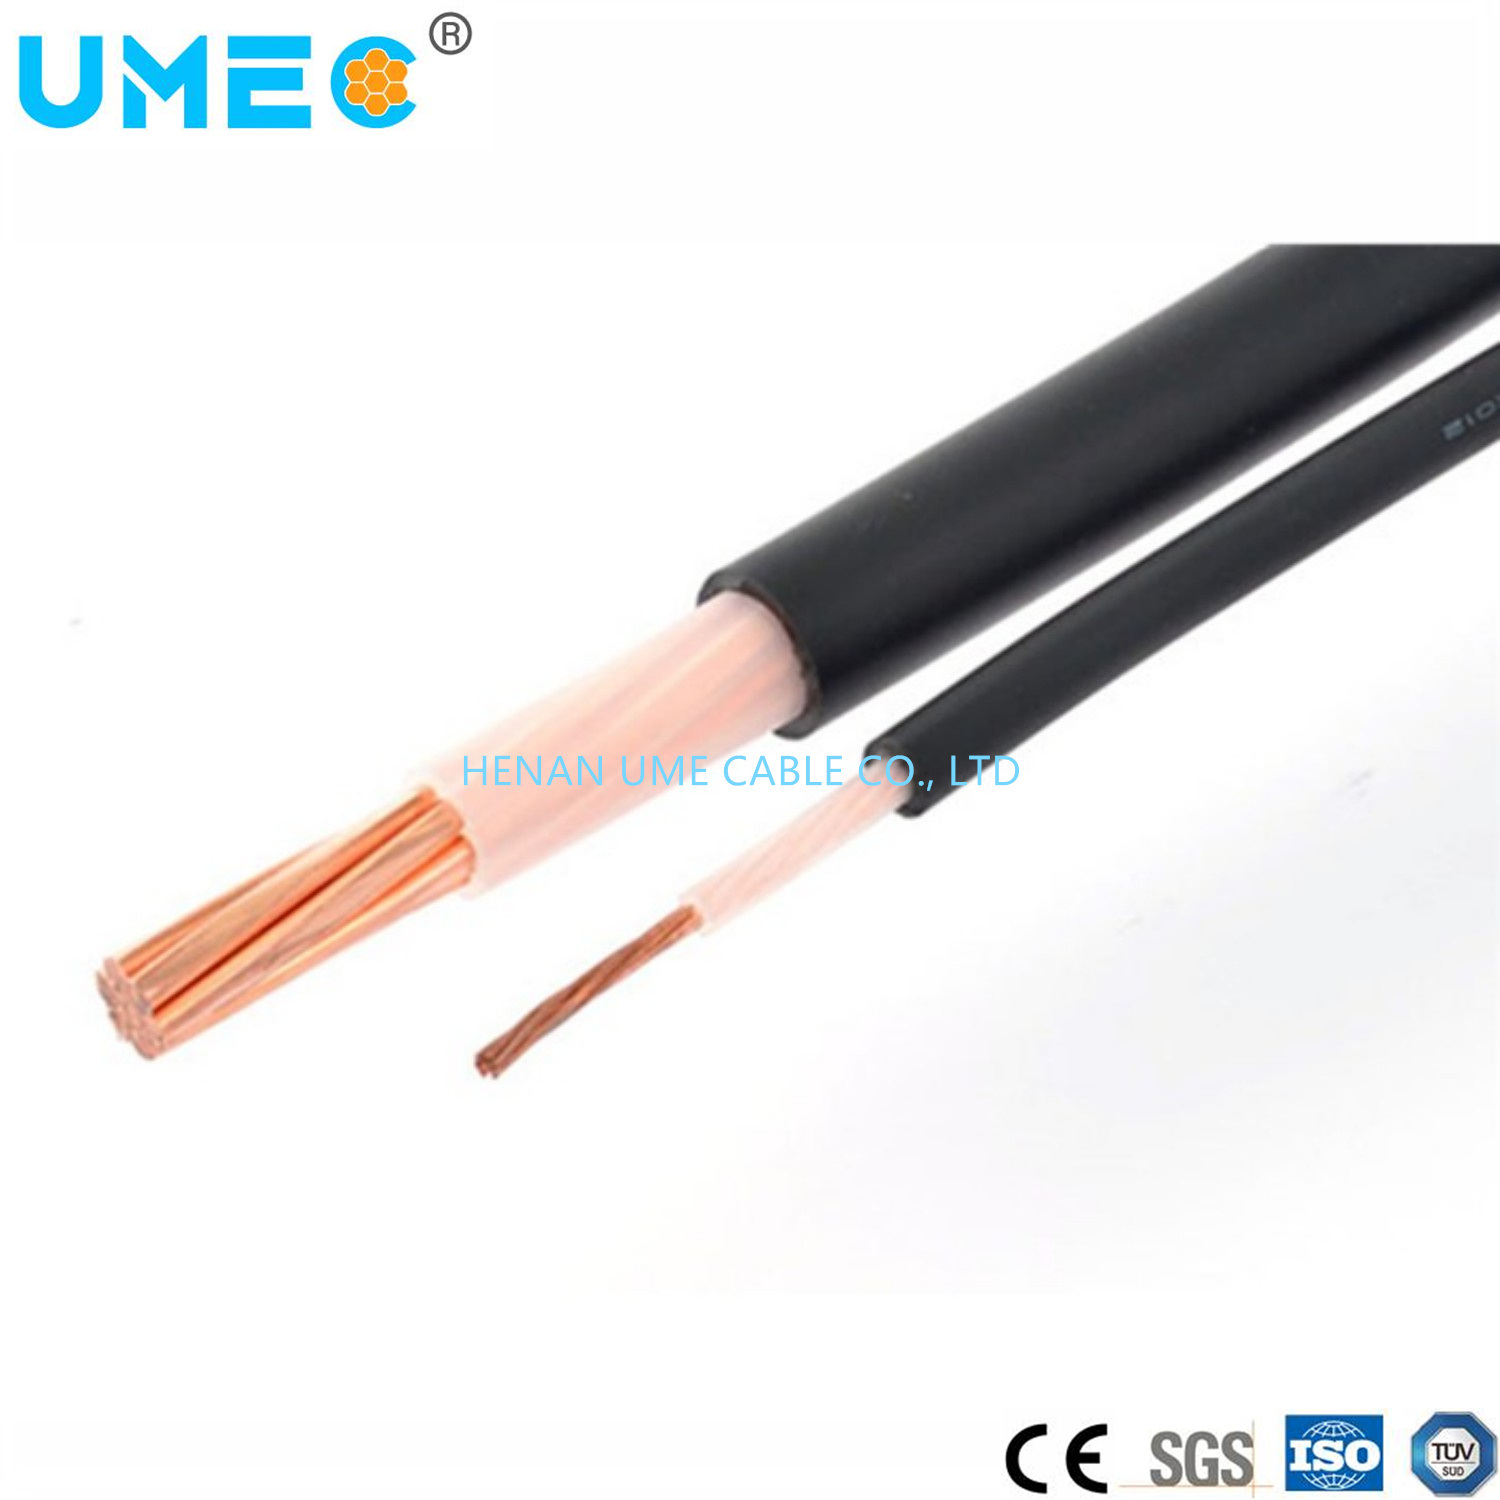 Wholesale Photovoltaic Cable (PV Solar Cable) 4mm2 /6mm2 /10mm2 /16mm2 /25mm2 Electrical Cable for Solar Power Panel Solar Station